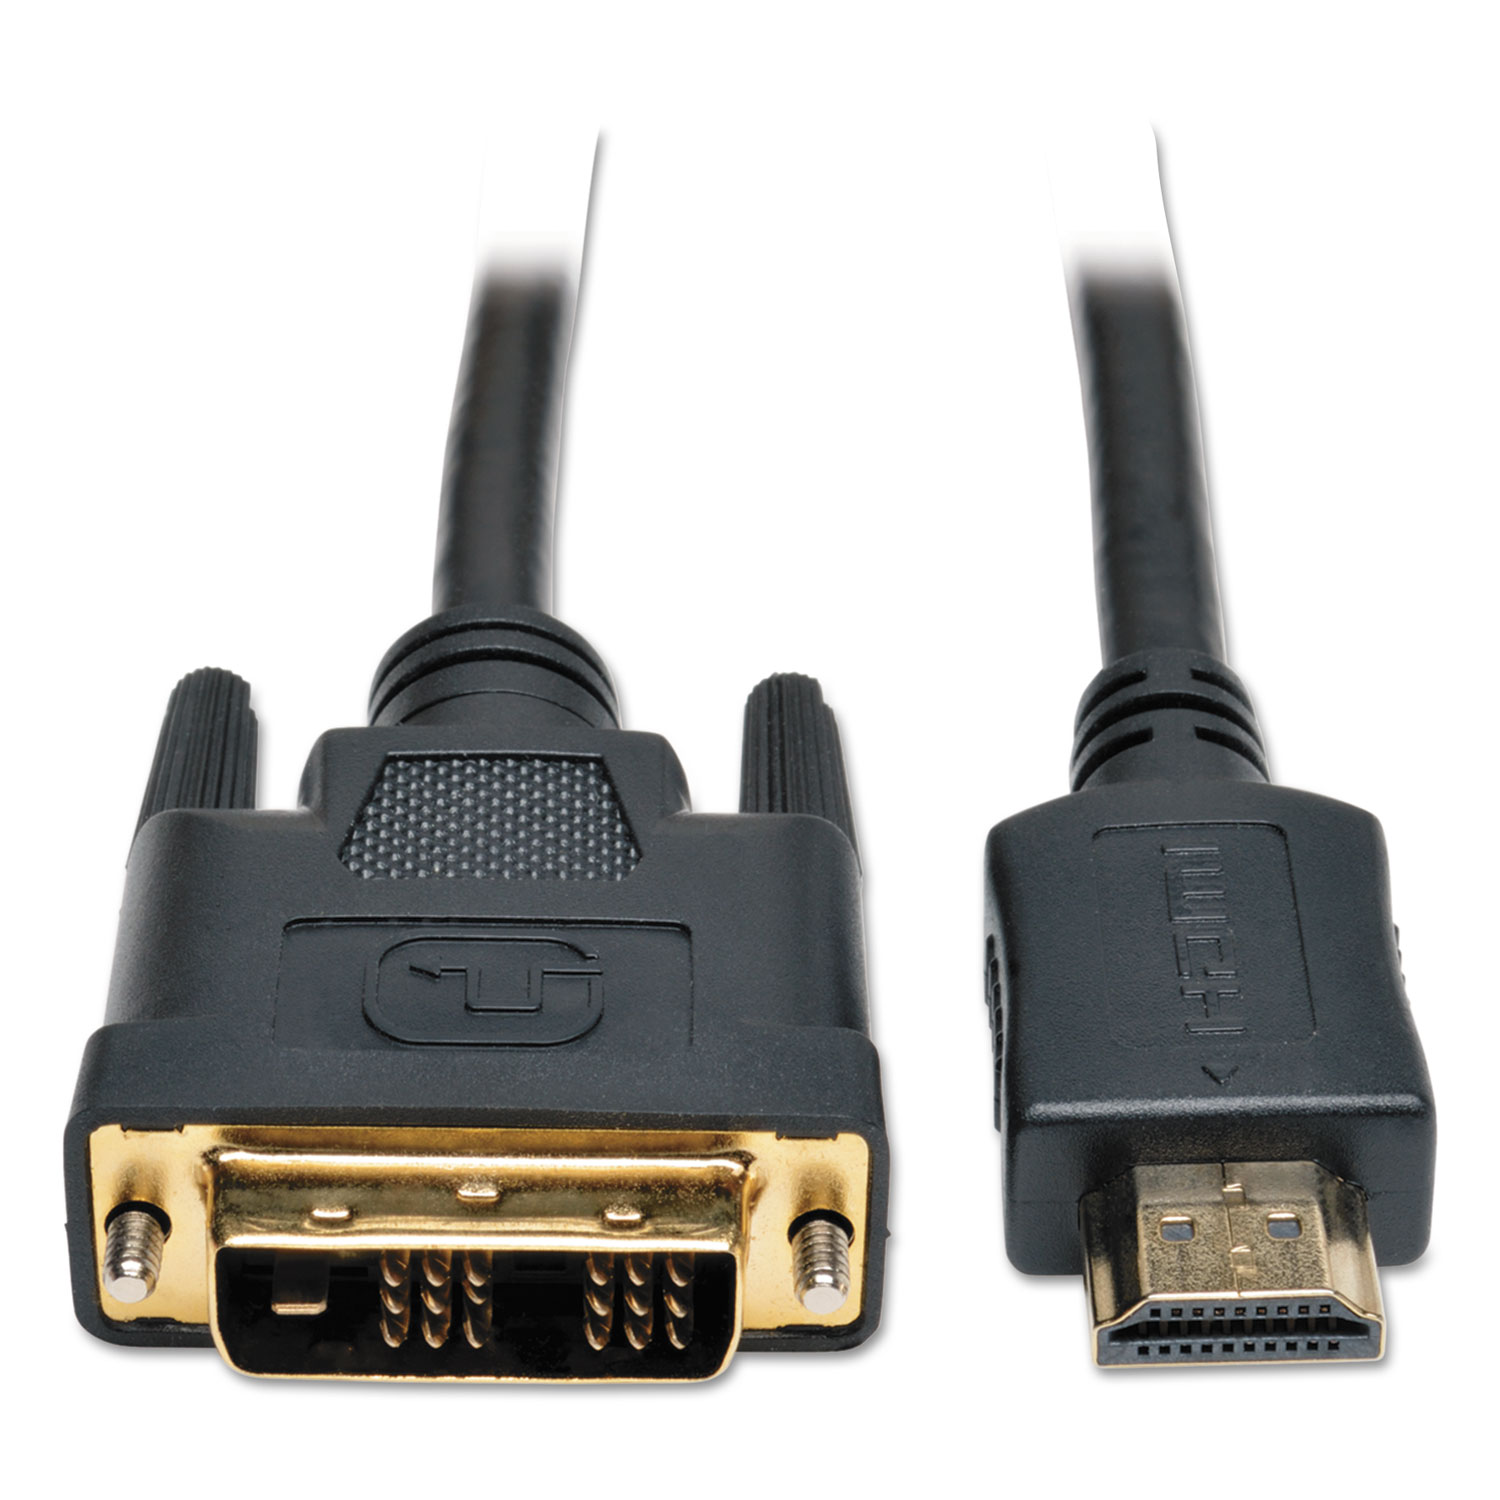  Tripp Lite P566-010 HDMI to DVI-D Cable, Digital Monitor Adapter Cable (M/M), 1080P, 10 ft., Black (TRPP566010) 